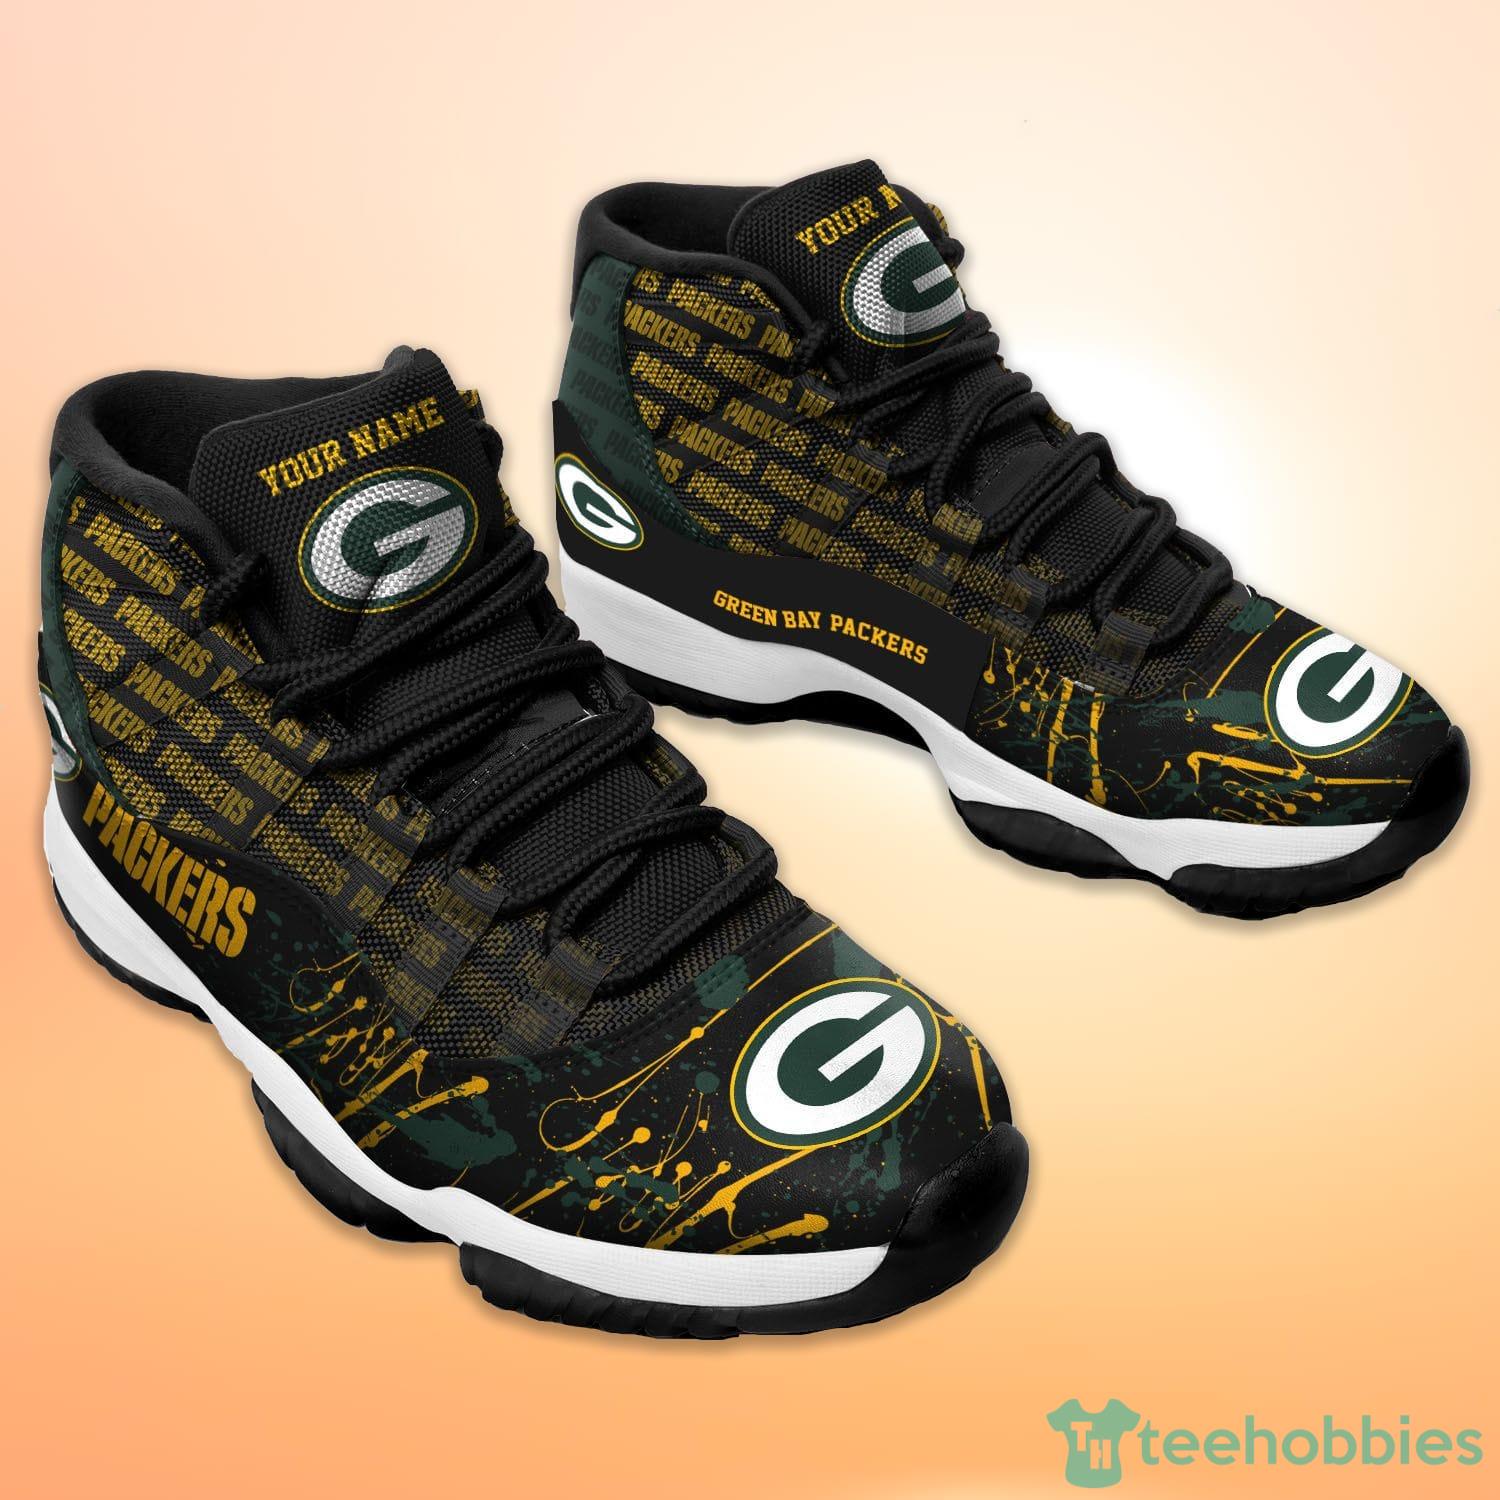 Personalized NFL Green Bay Packers Custom Name Air Force Shoes - Tagotee